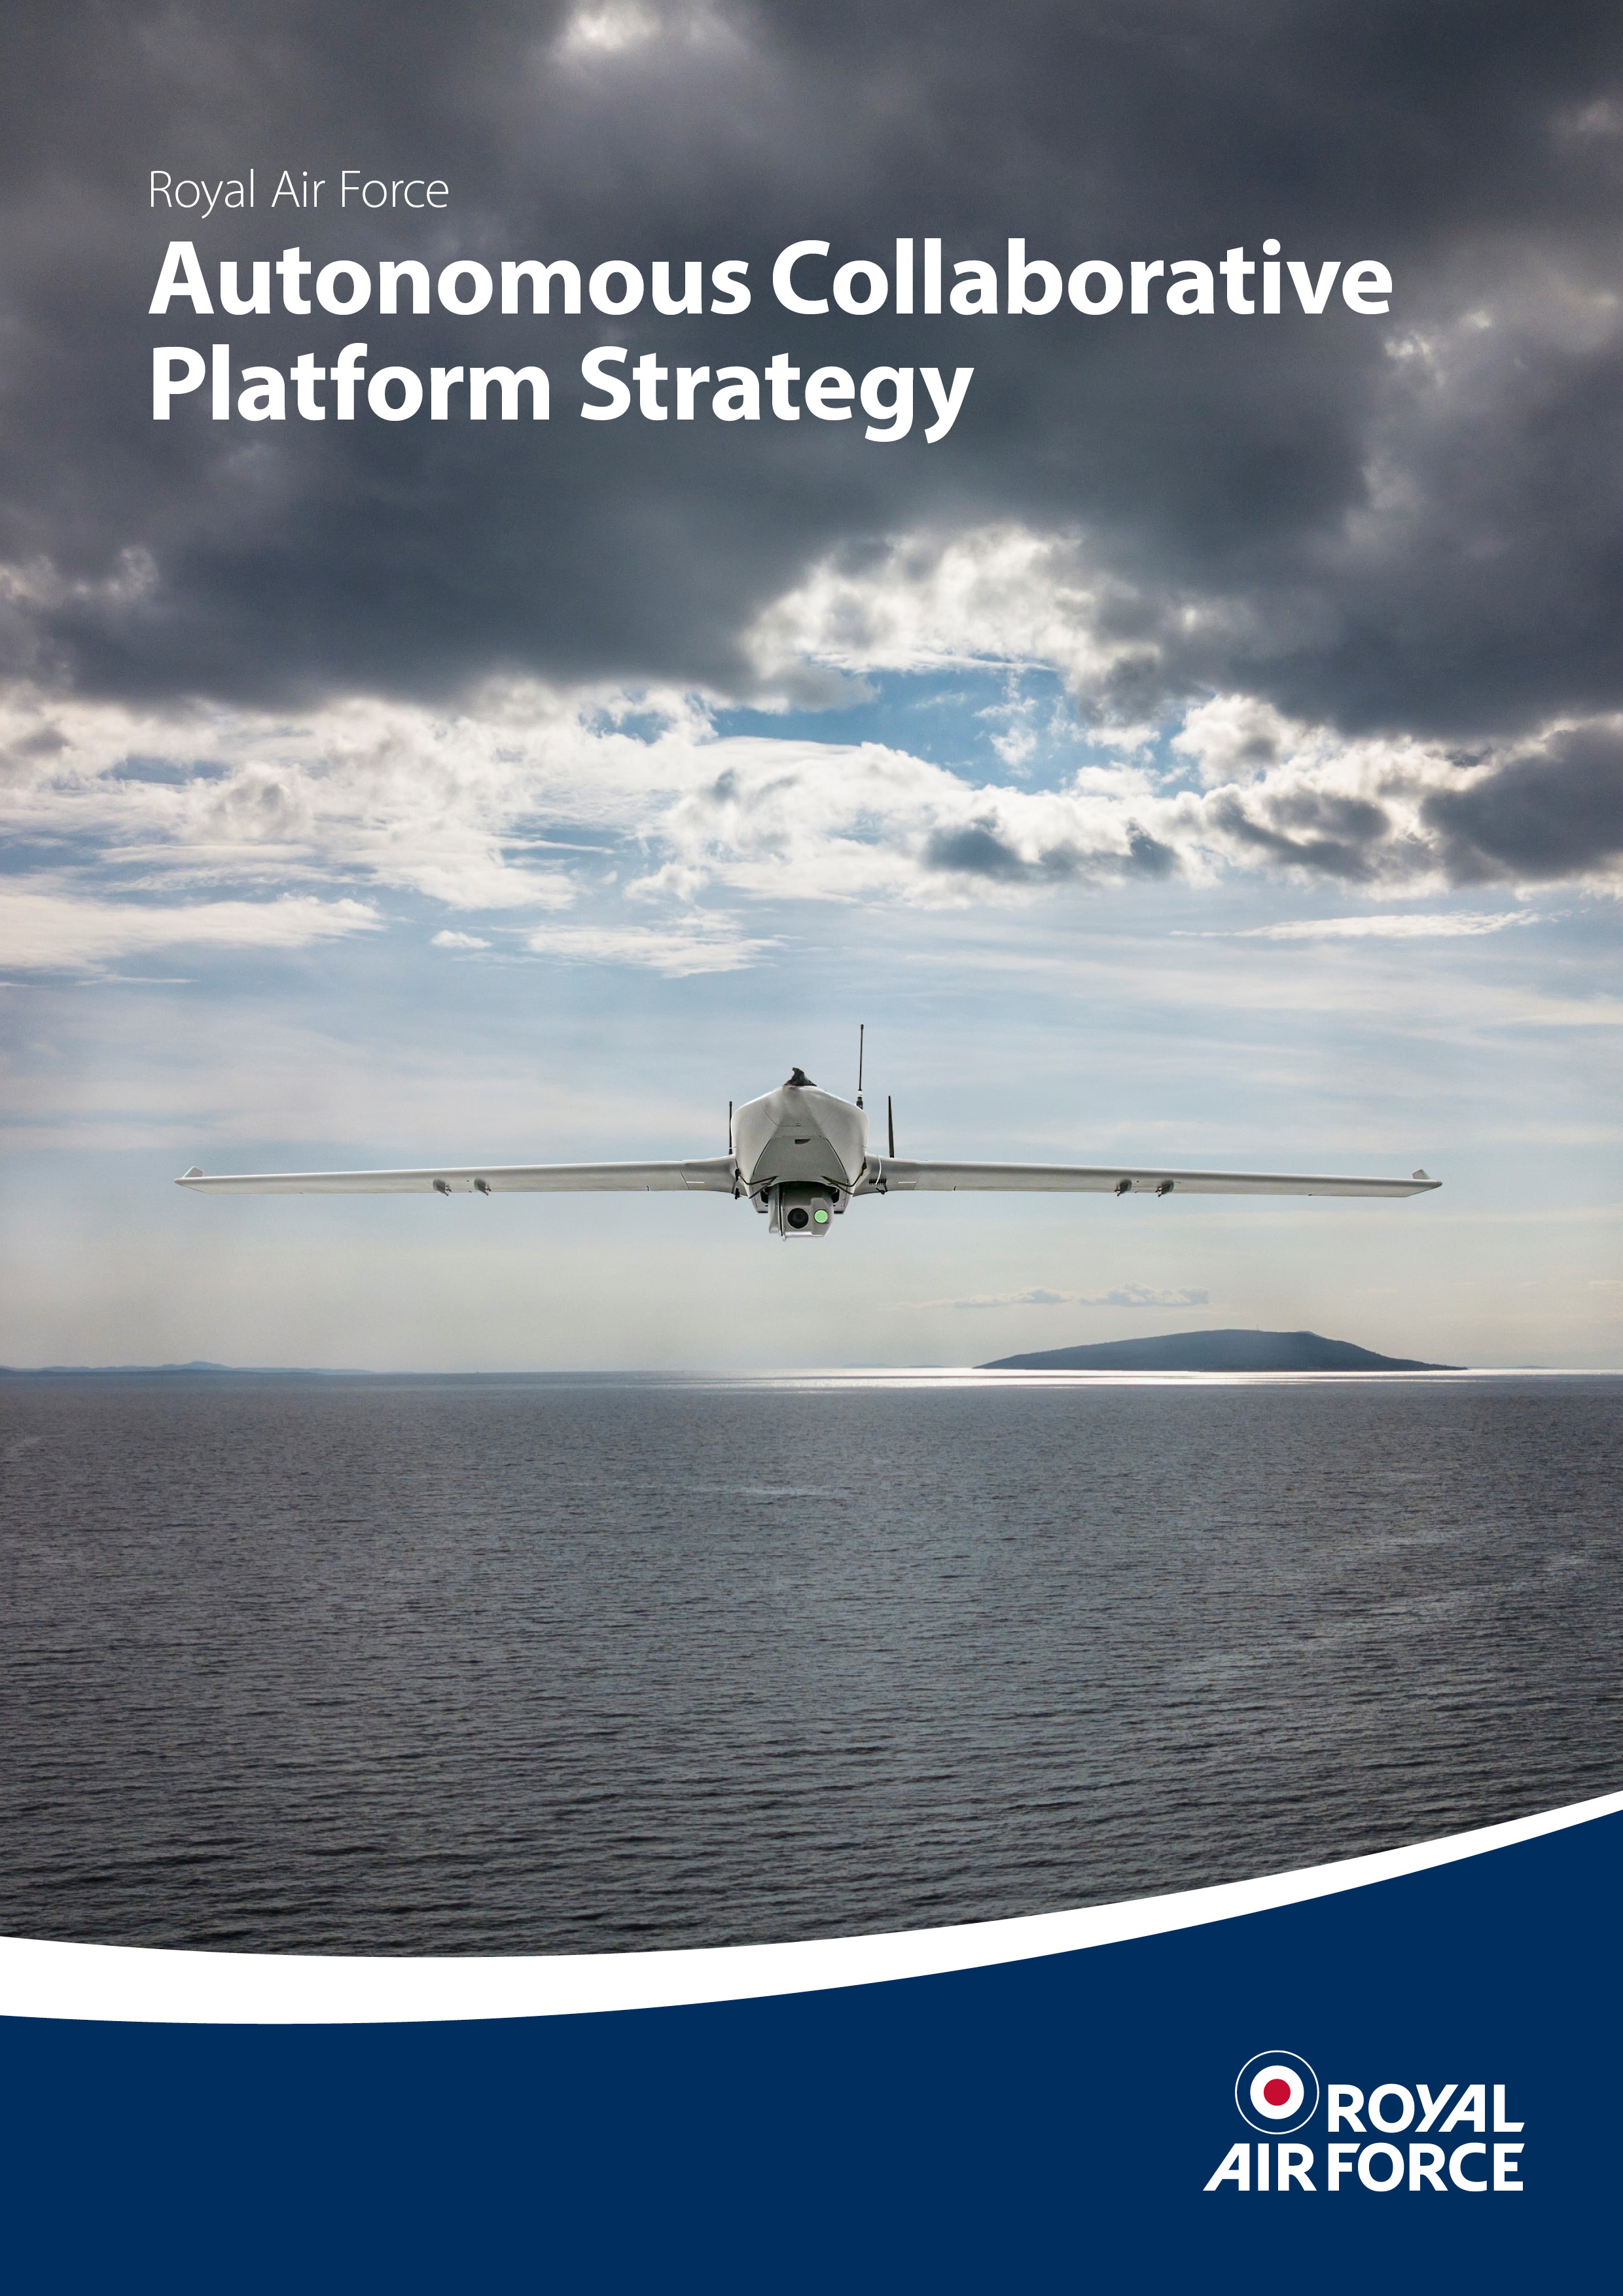 Image shows the cover of the RAF's Autonomous Collaborative Platforms strategy.